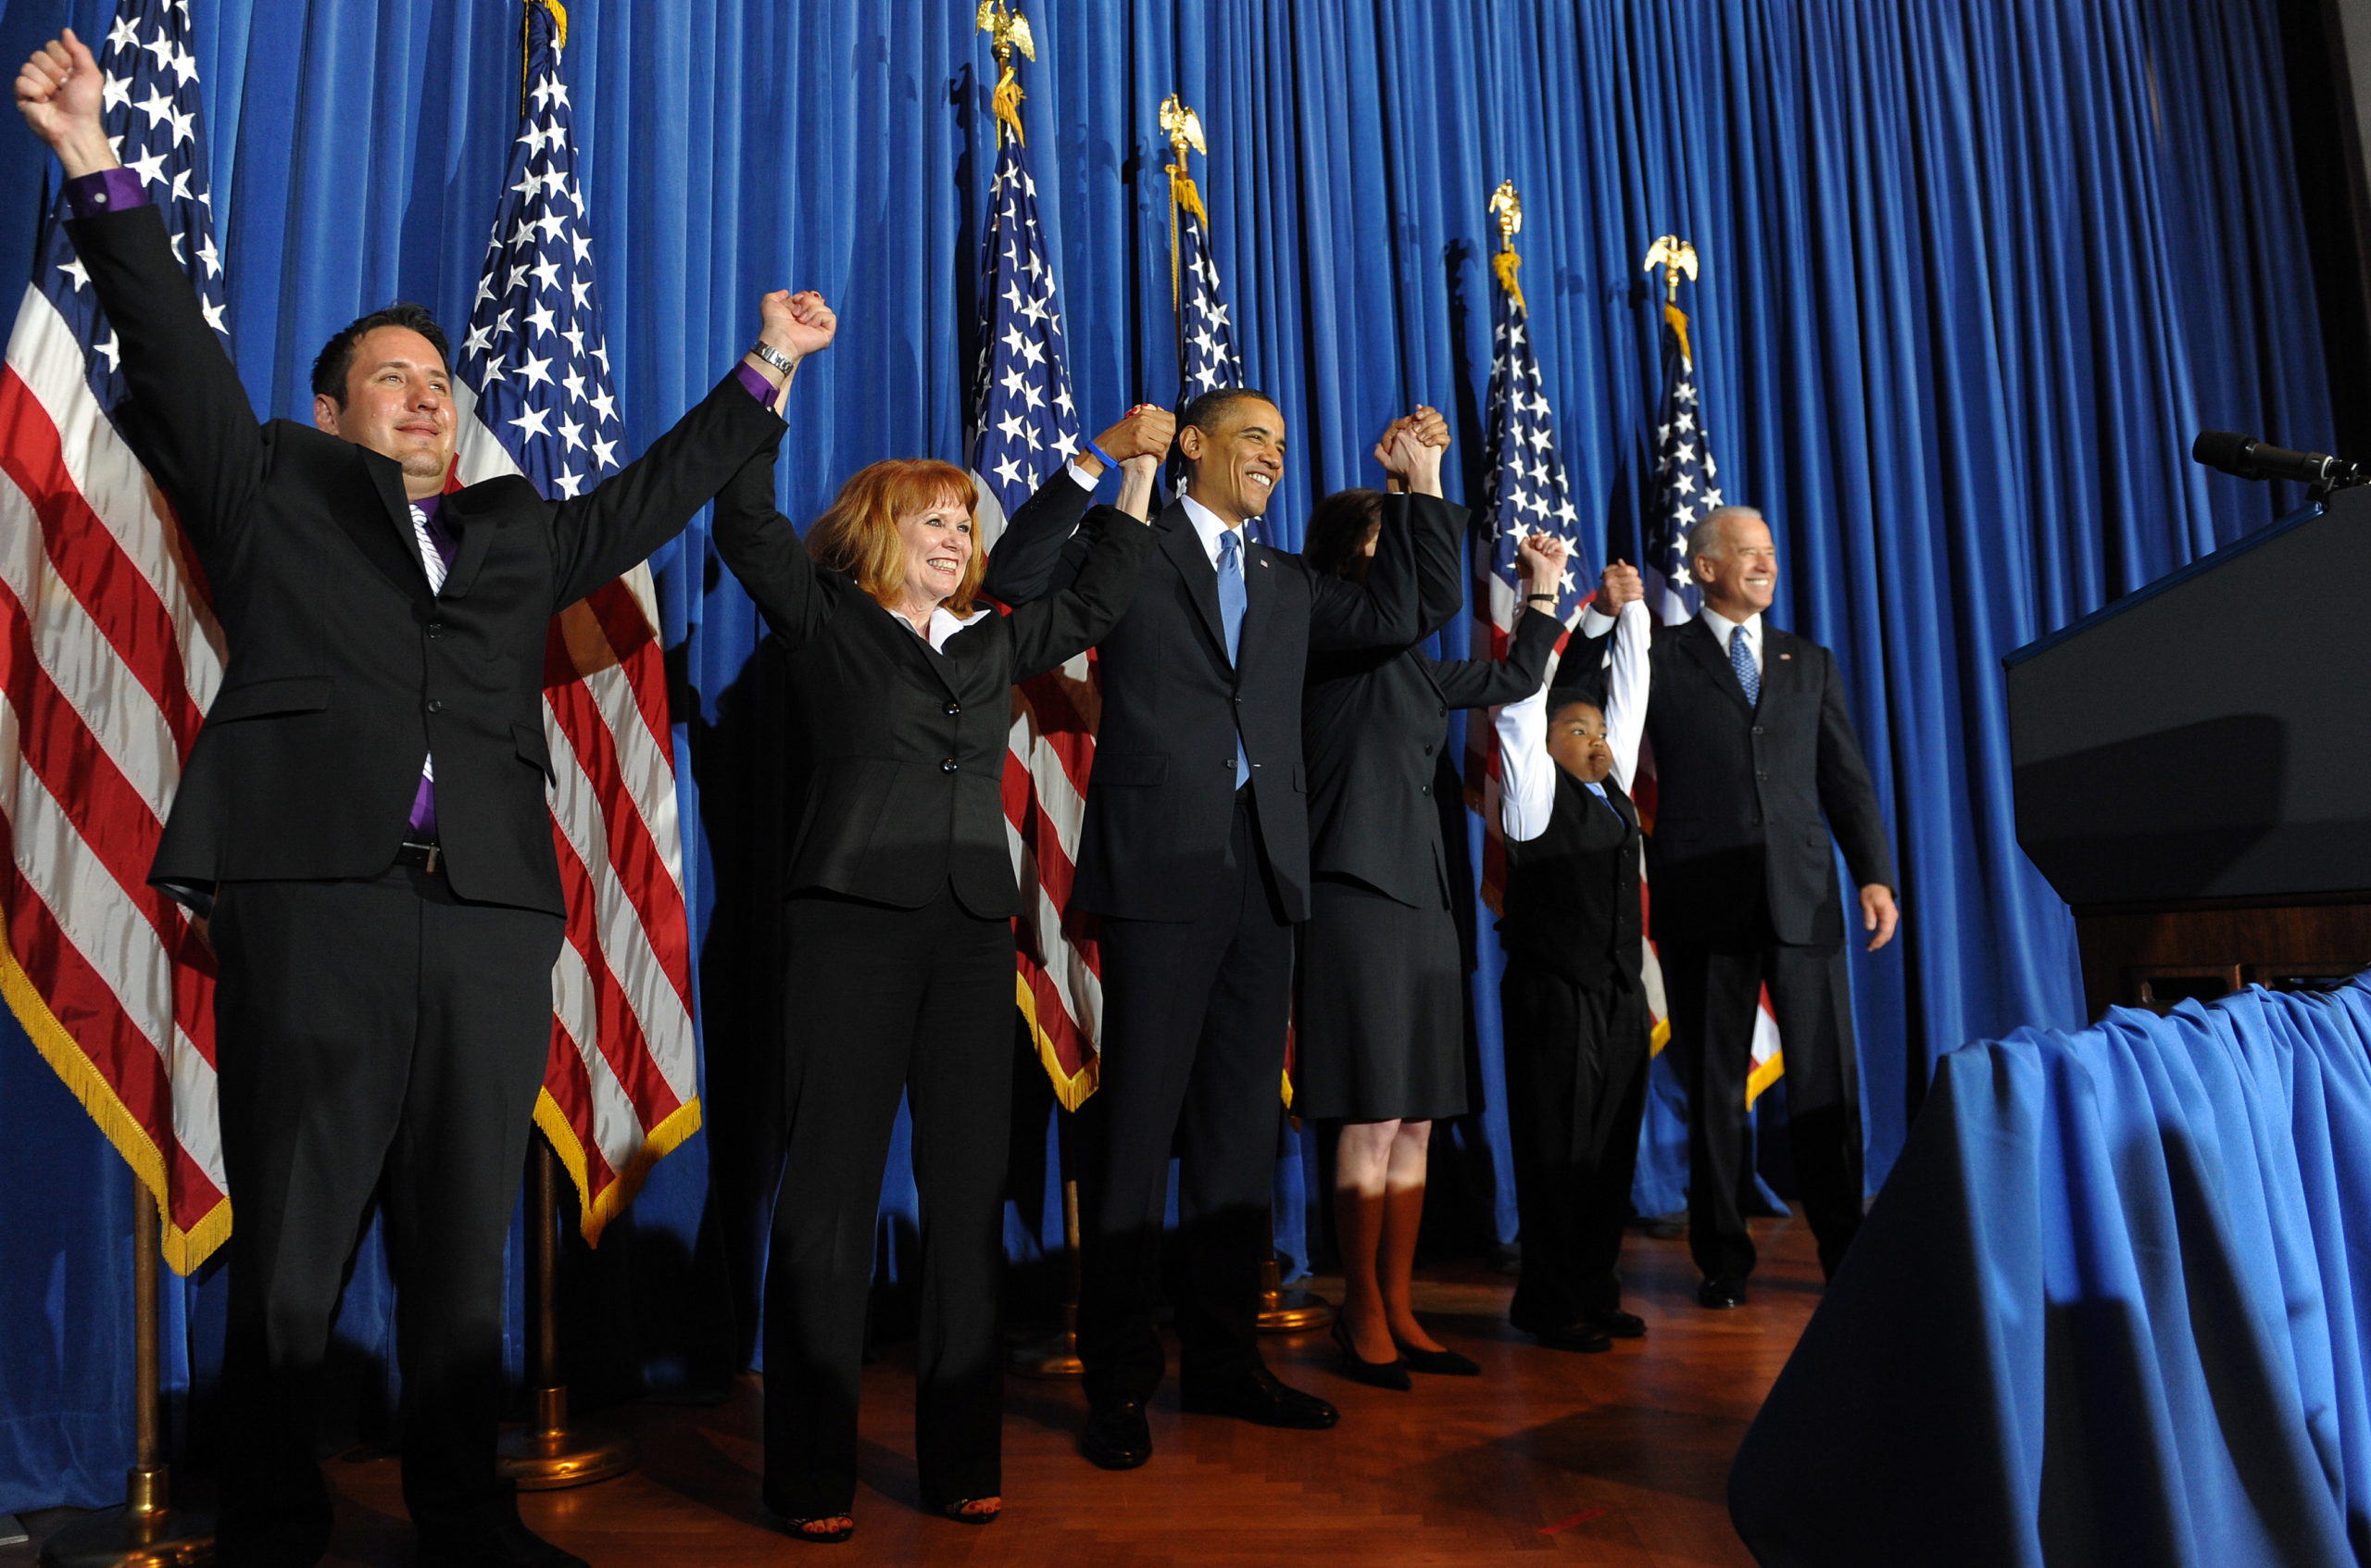 US President Barack Obama (C) celebrates with lawmakers after holding a rally celebrating the passage and signing into law of the Patient Protection and Affordable Care Act health insurance reform bill, at the Interior Department in Washington, DC, on March 23, 2010. Obama signed into law his historic health care reform, enacting the most sweeping social legislation in decades which will ensure coverage for almost all Americans. AFP PHOTO/Jewel SAMAD (Photo credit should read JEWEL SAMAD/AFP via Getty Images)